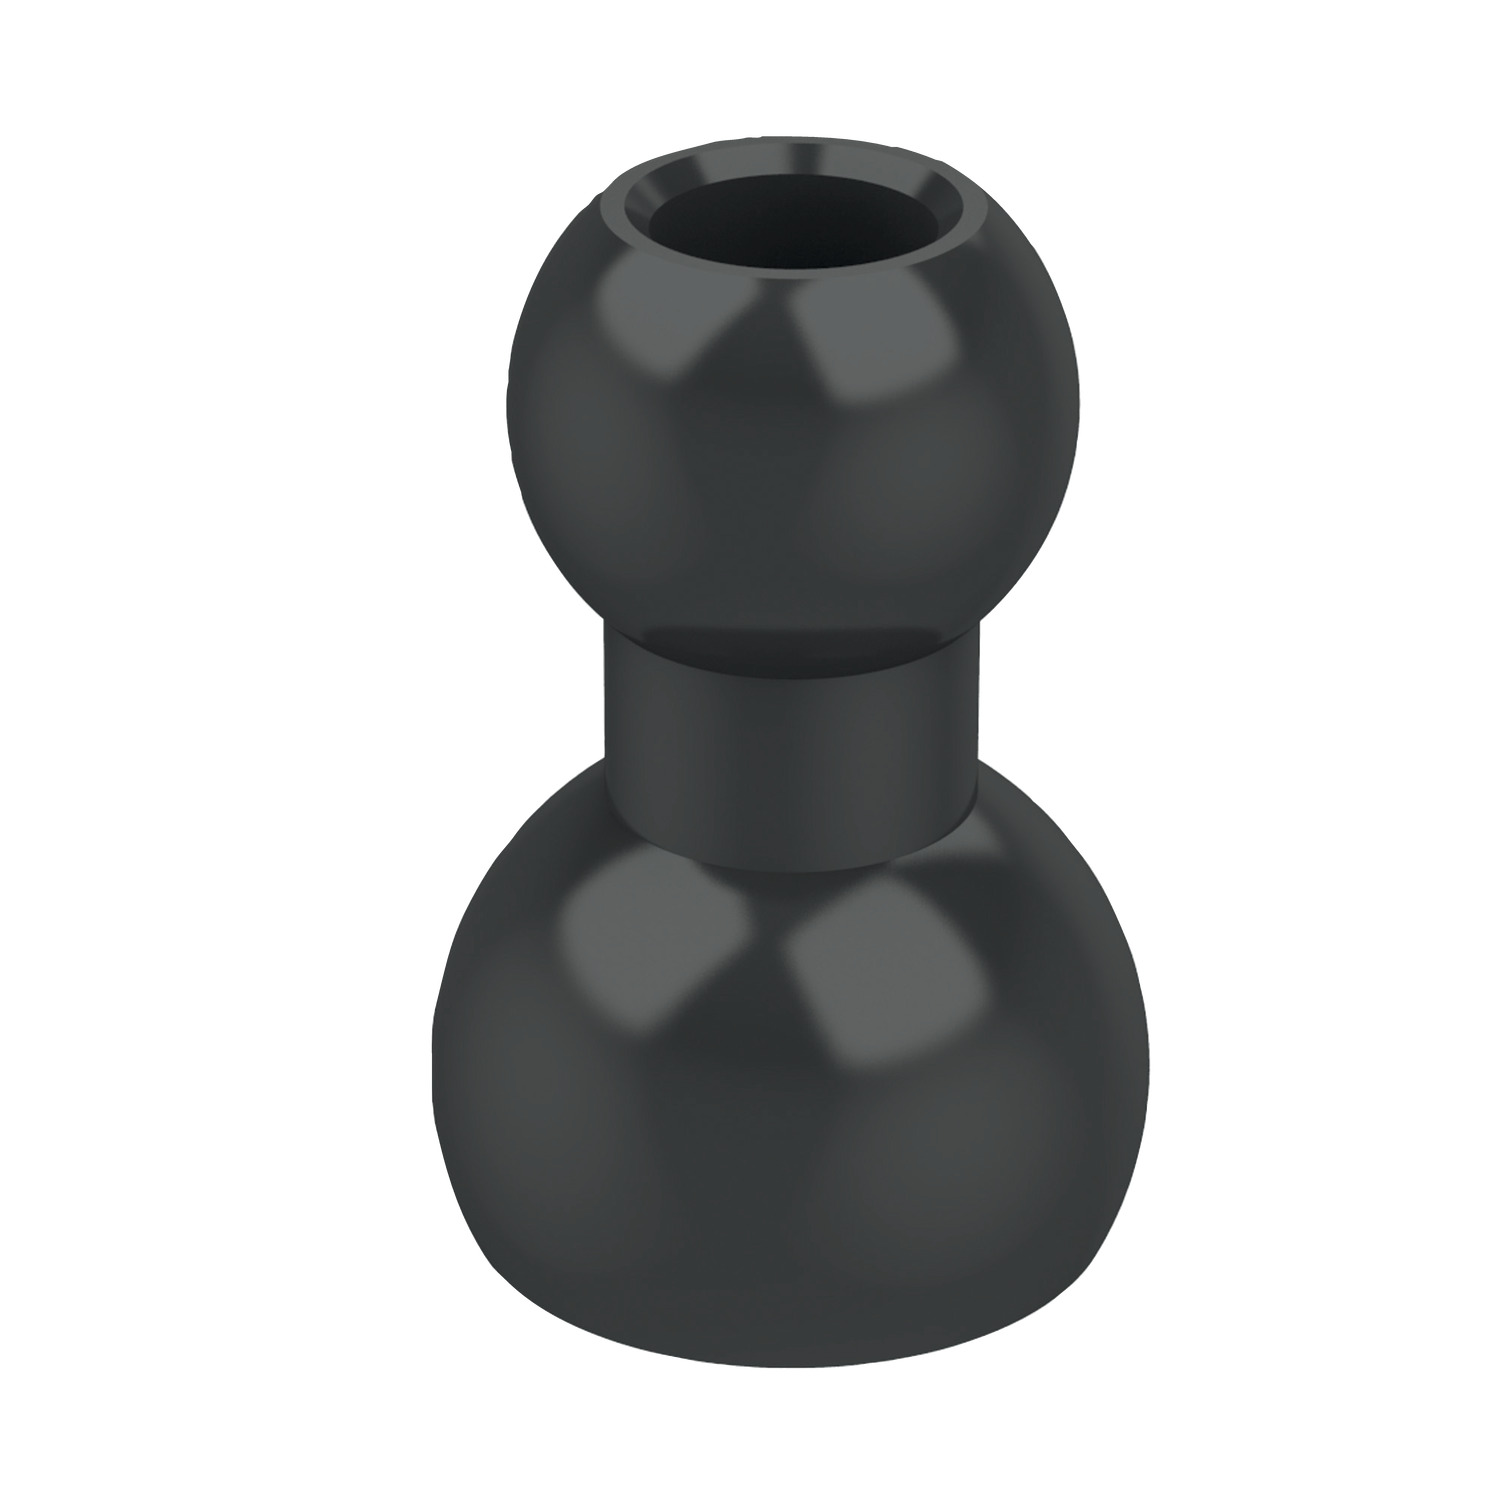 20053.W0020 Modular Coolant Nozzles - Acetal. Reverse link to allow Swivel Max base to be used at both ends of nozzle assembly